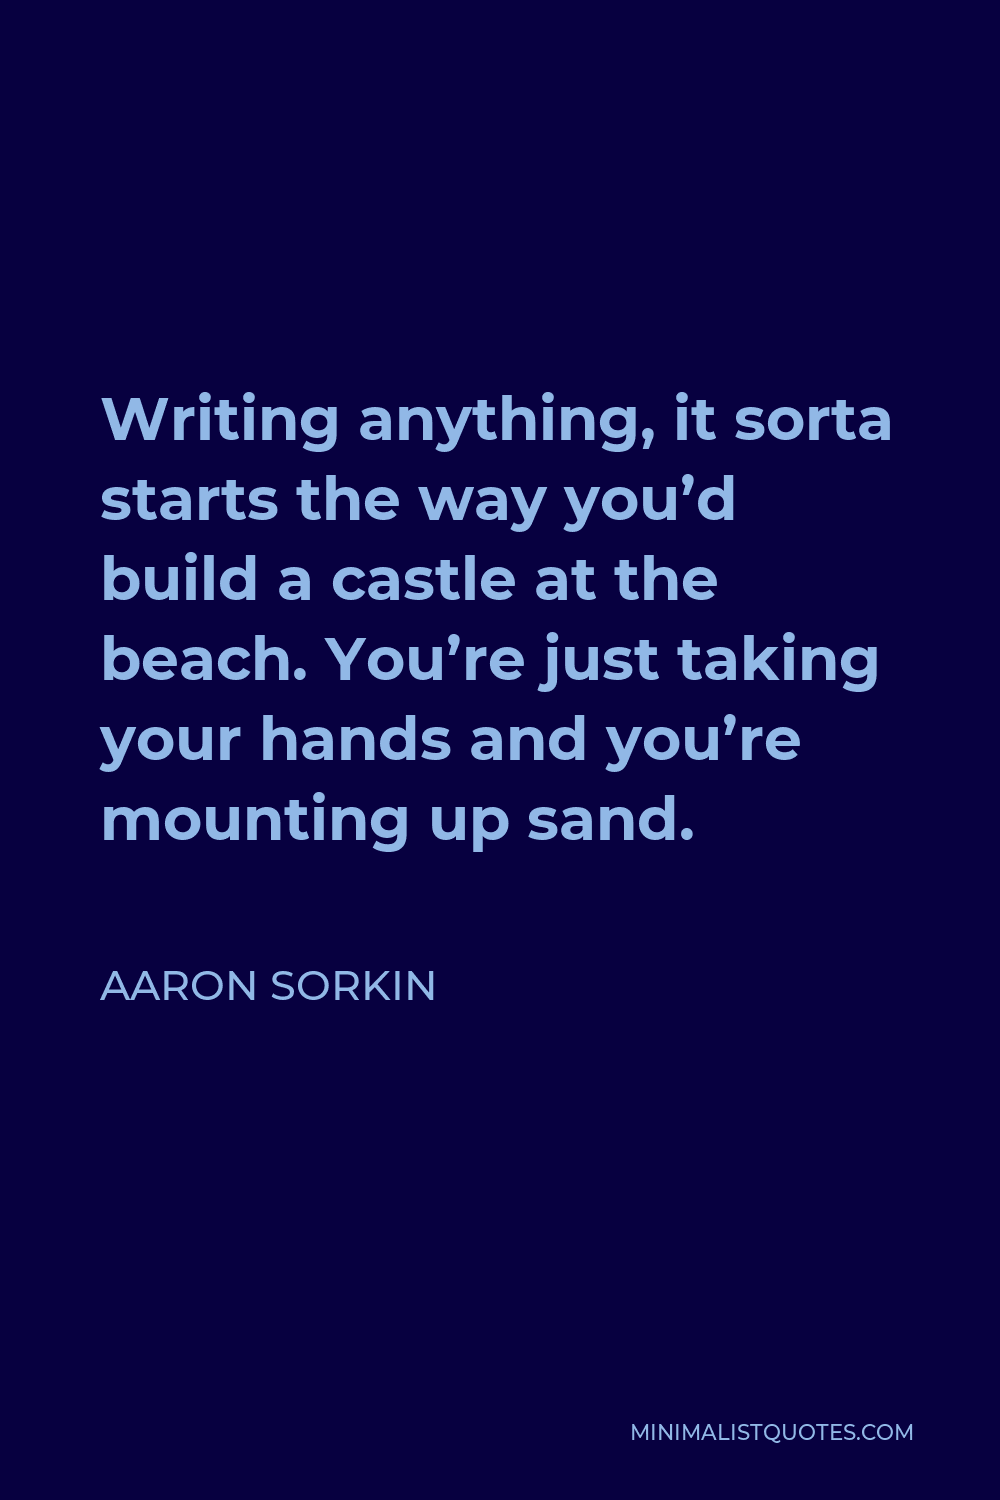 Aaron Sorkin Quote - Writing anything, it sorta starts the way you’d build a castle at the beach. You’re just taking your hands and you’re mounting up sand.